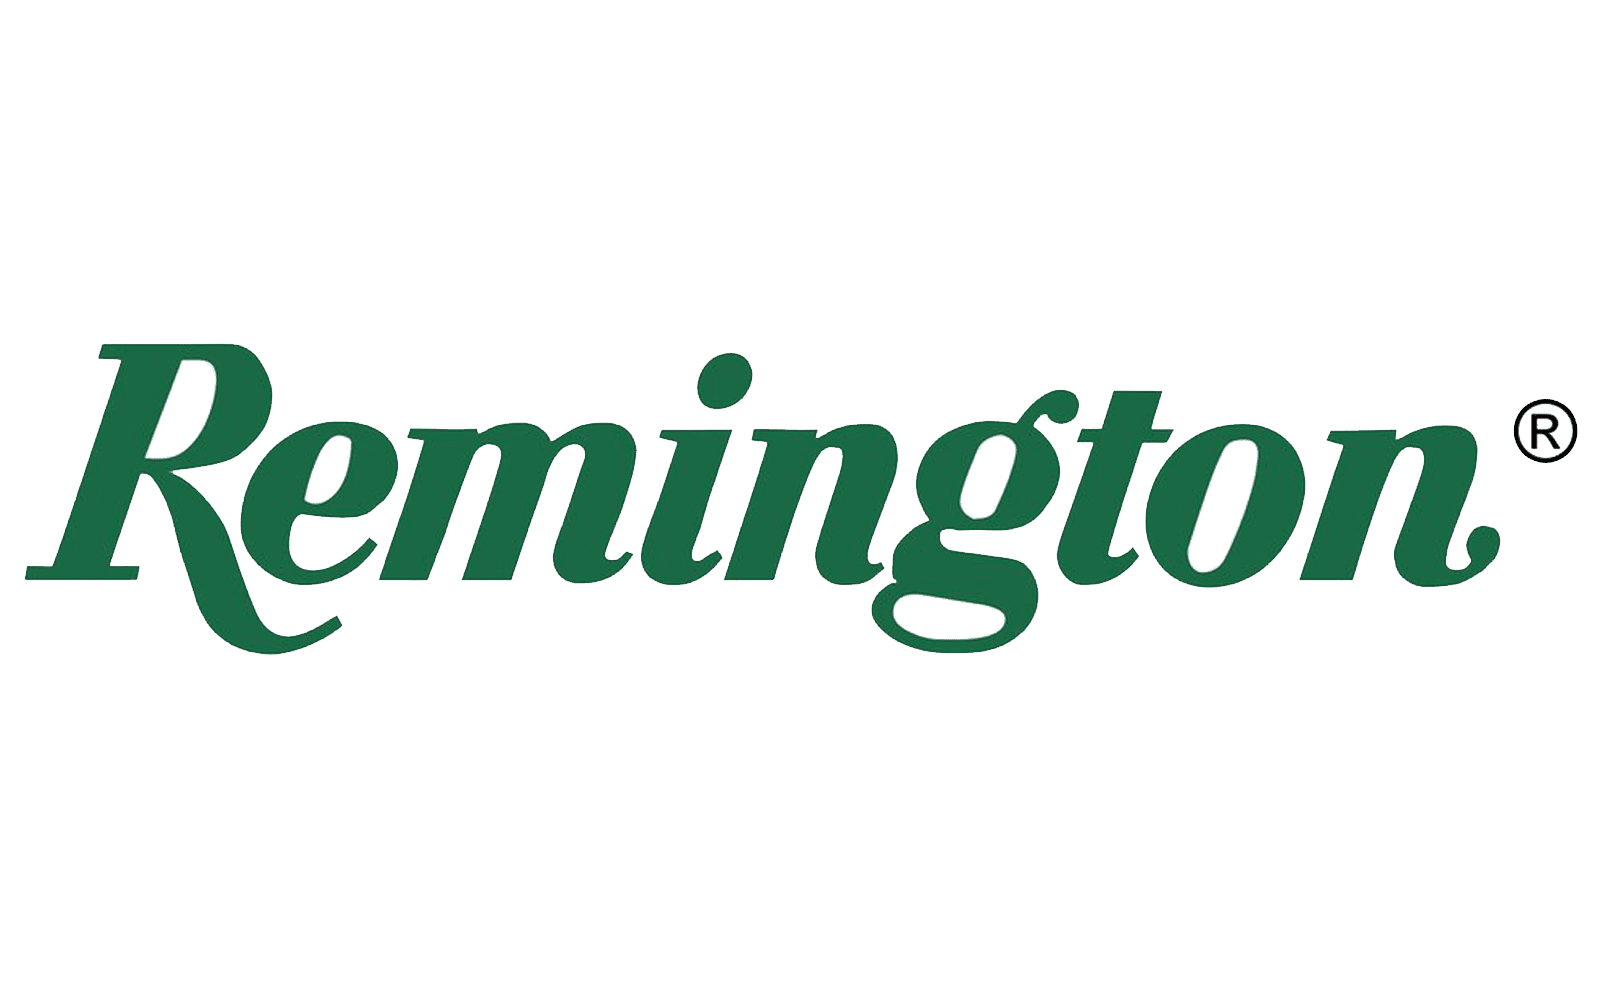 Remington logo and symbol, meaning, history, PNG